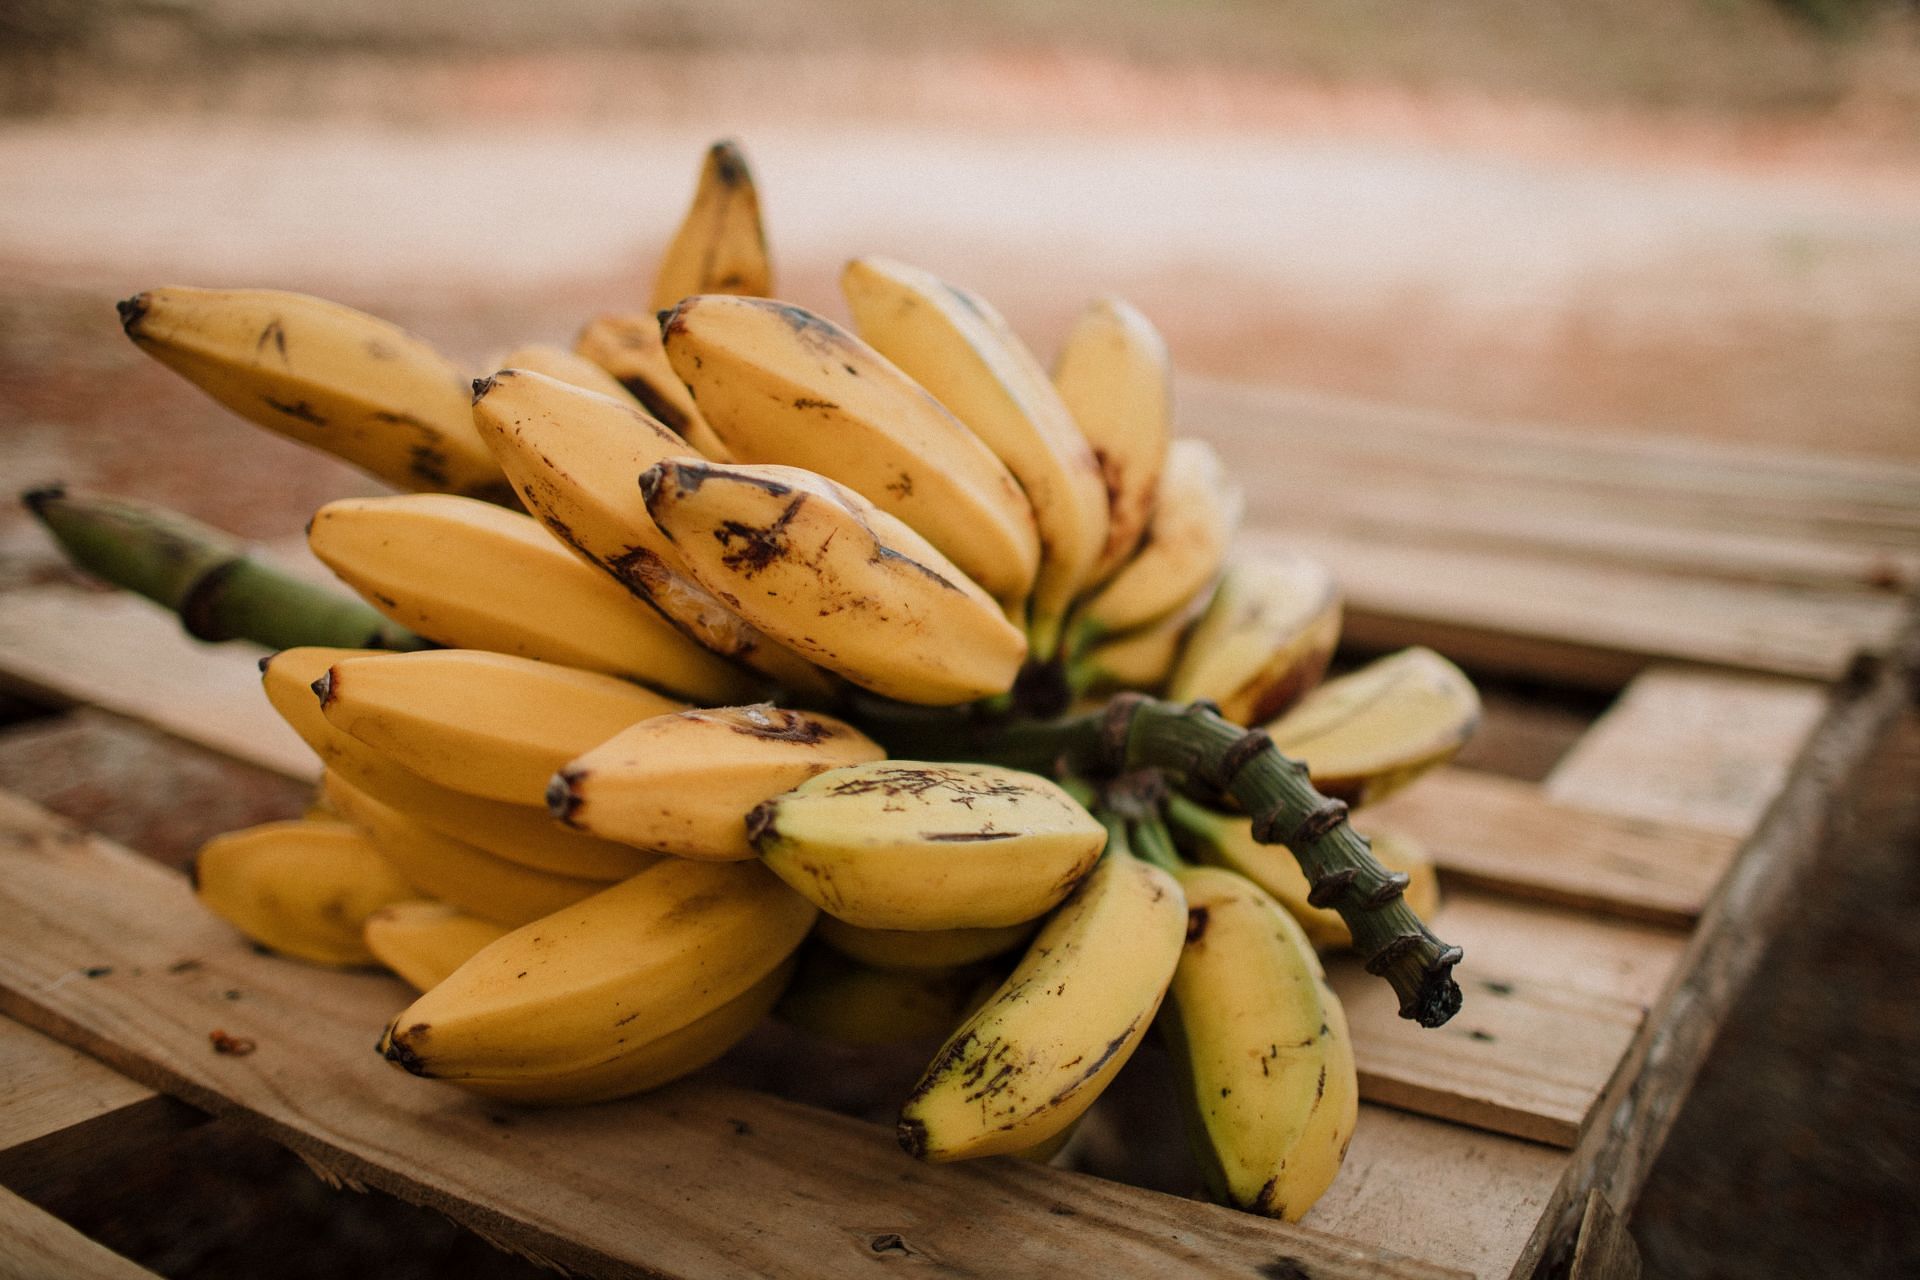 Bananas are excellent for skin, as they&#039;re rich in nutrients. (Image via Pexels/Luis Quintero)